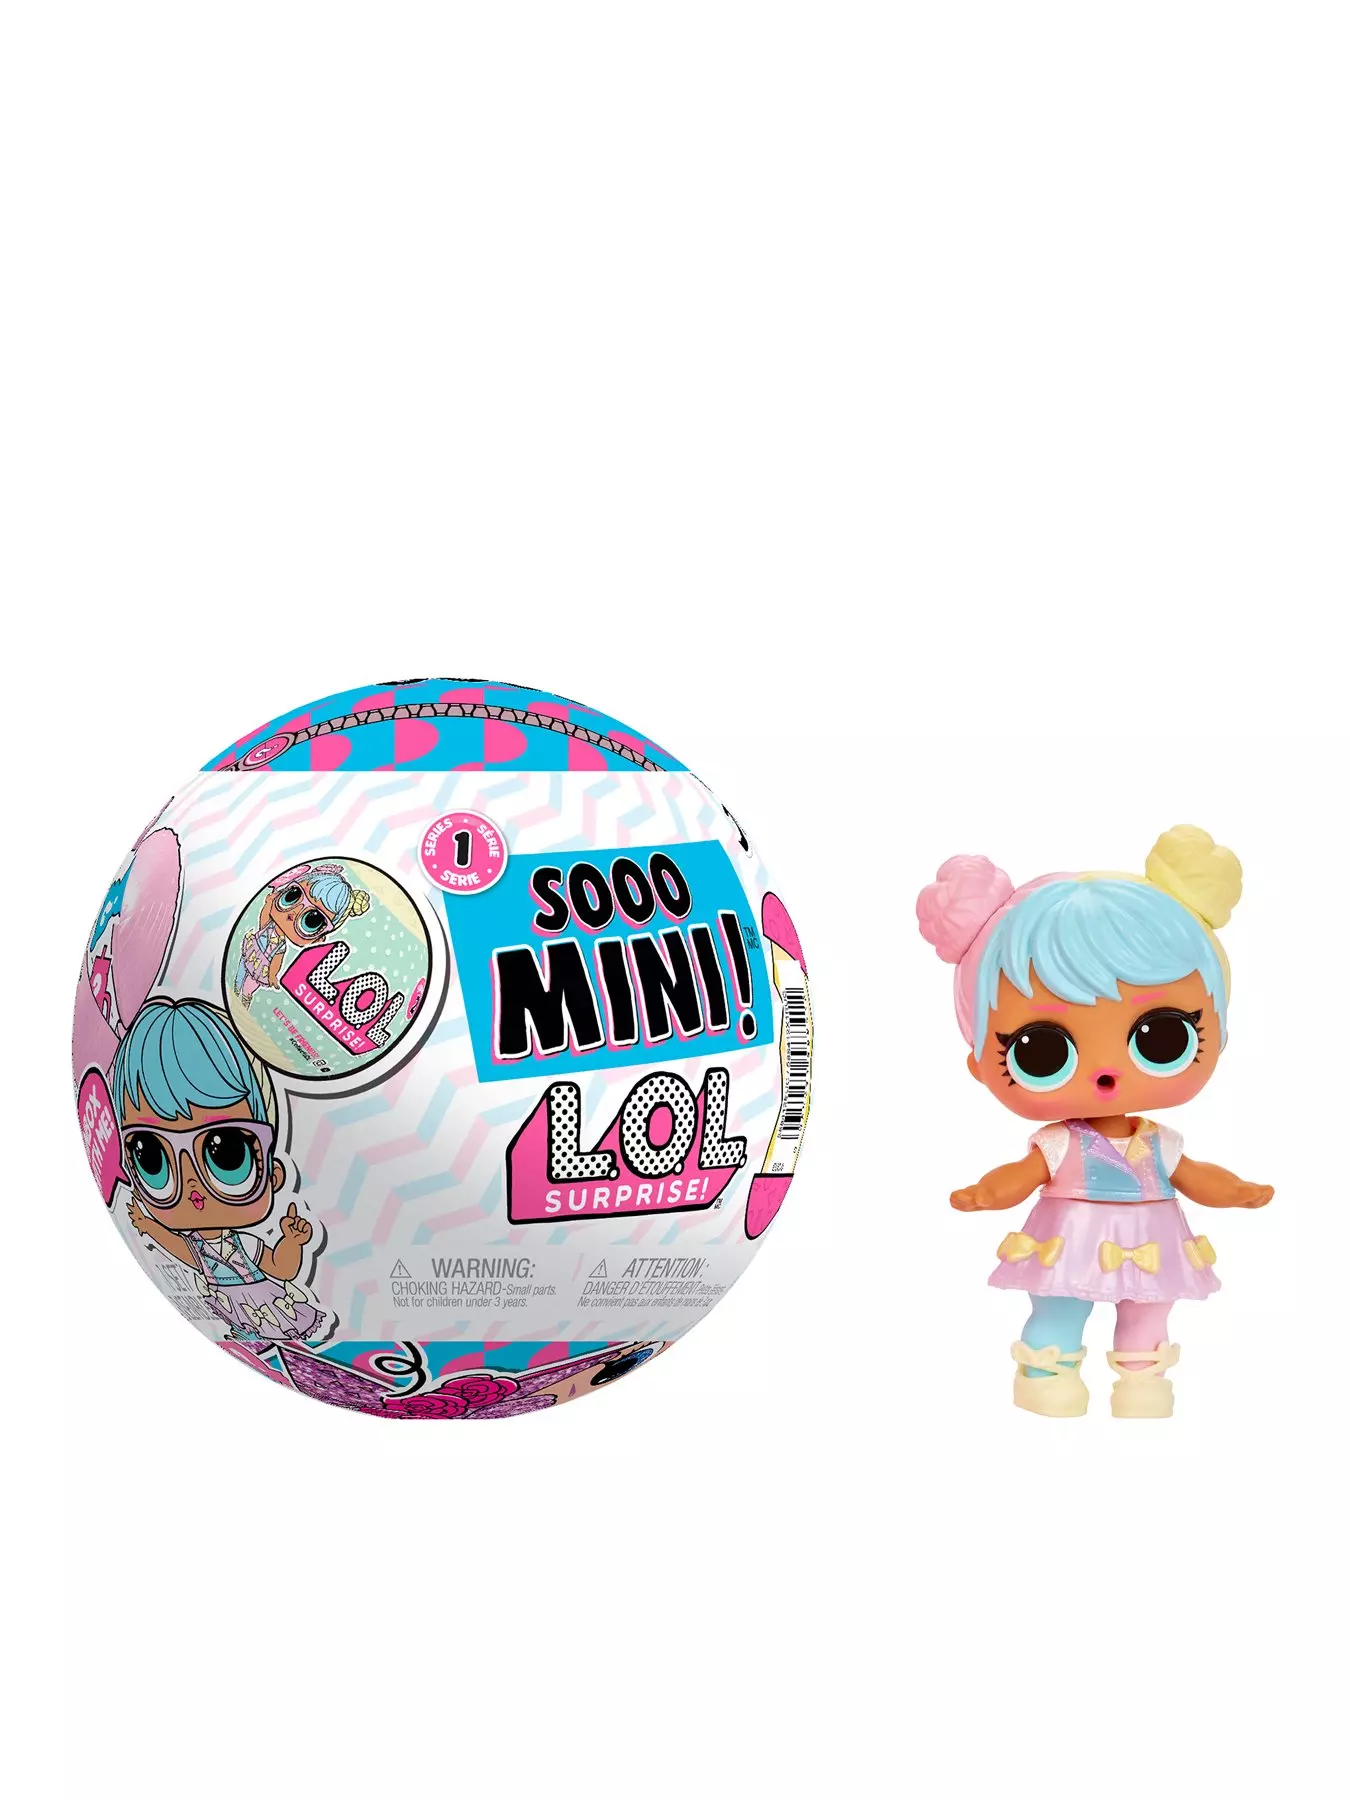 LOL Surprise Mega Ball Magic w/ 12 Collectible Dolls, 60+ Surprises, 4  Unboxing Experiences, Squish Sand, Bubbles, Gel Crush, Shell Smash, Limited  Edition Doll 